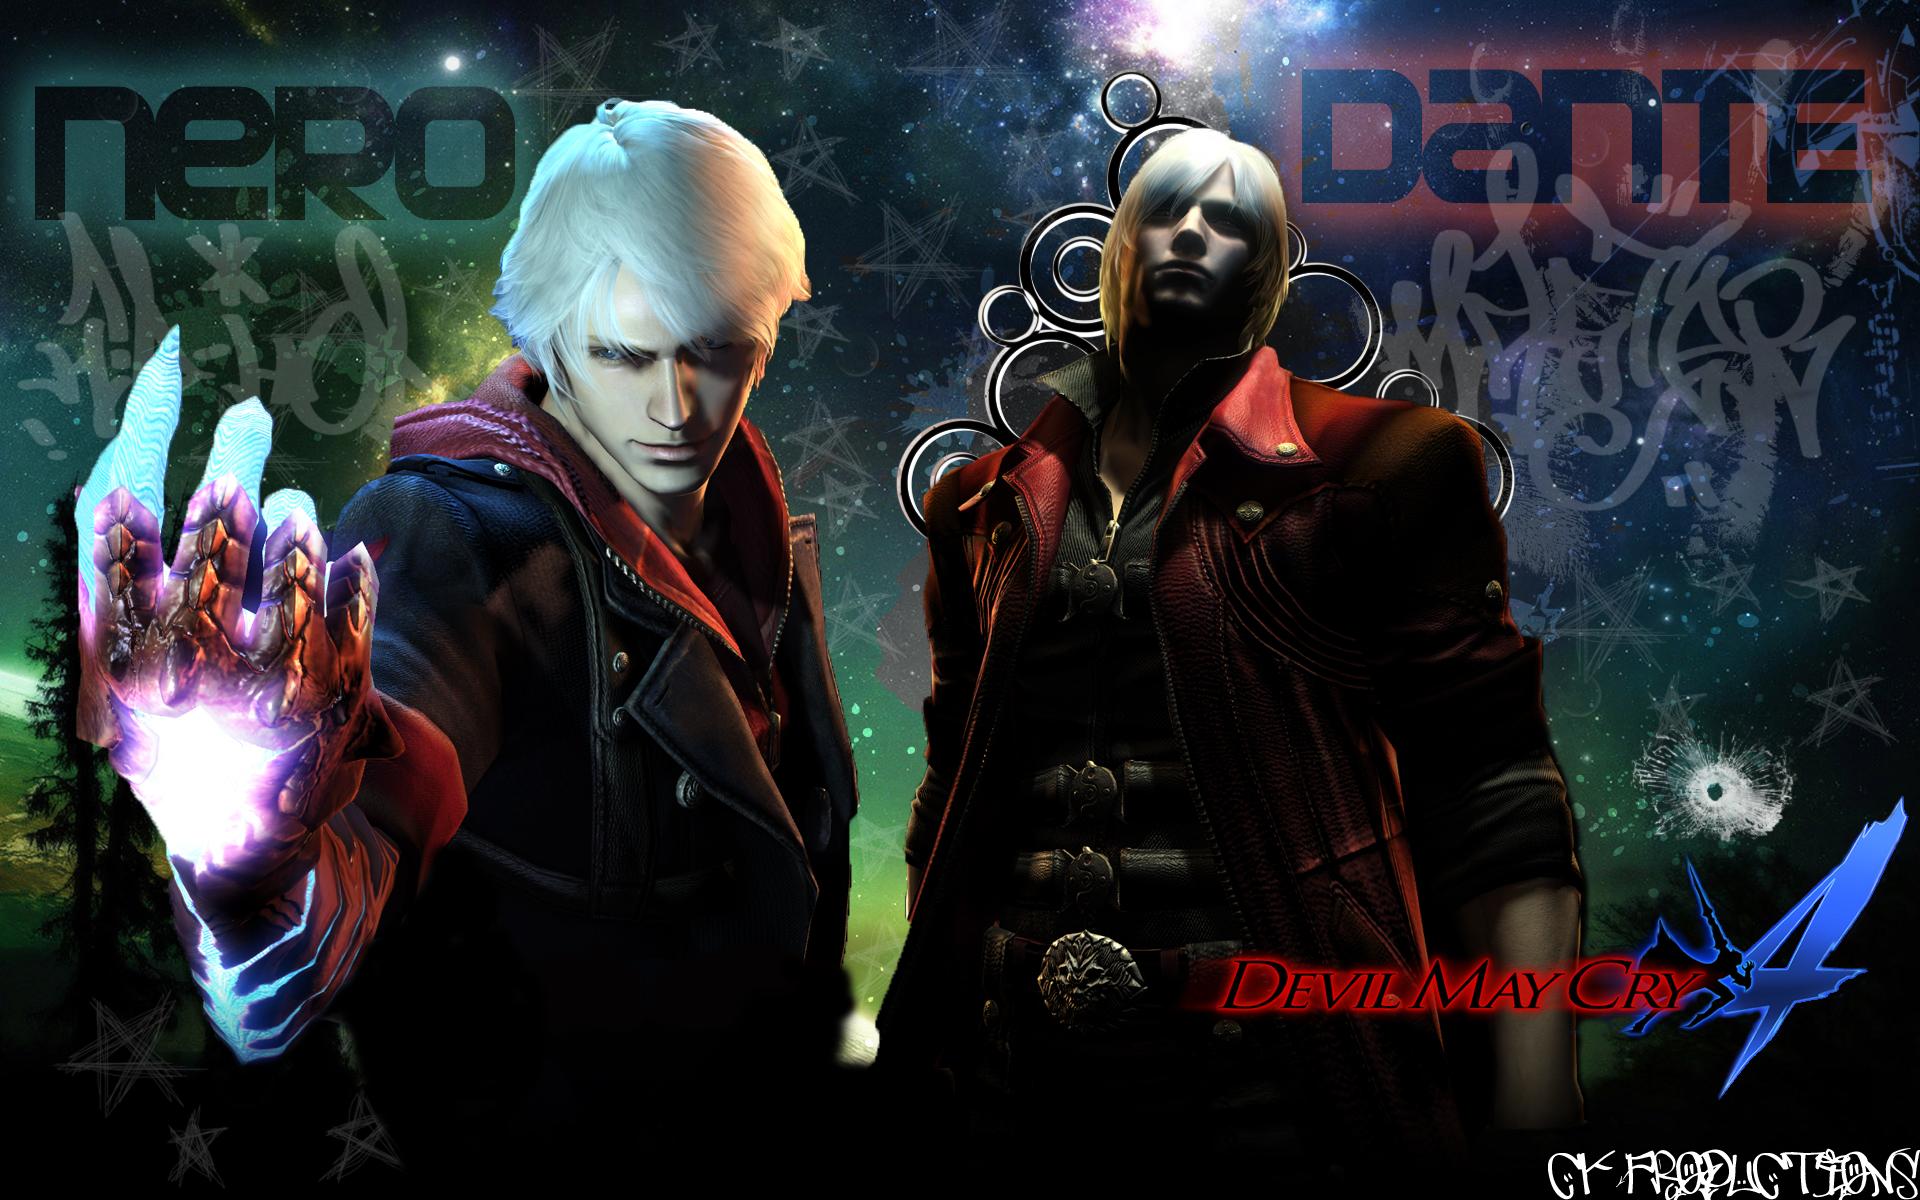 Devil may cry 4 on Pinterest | Devil May Cry, Deviantart and Devil